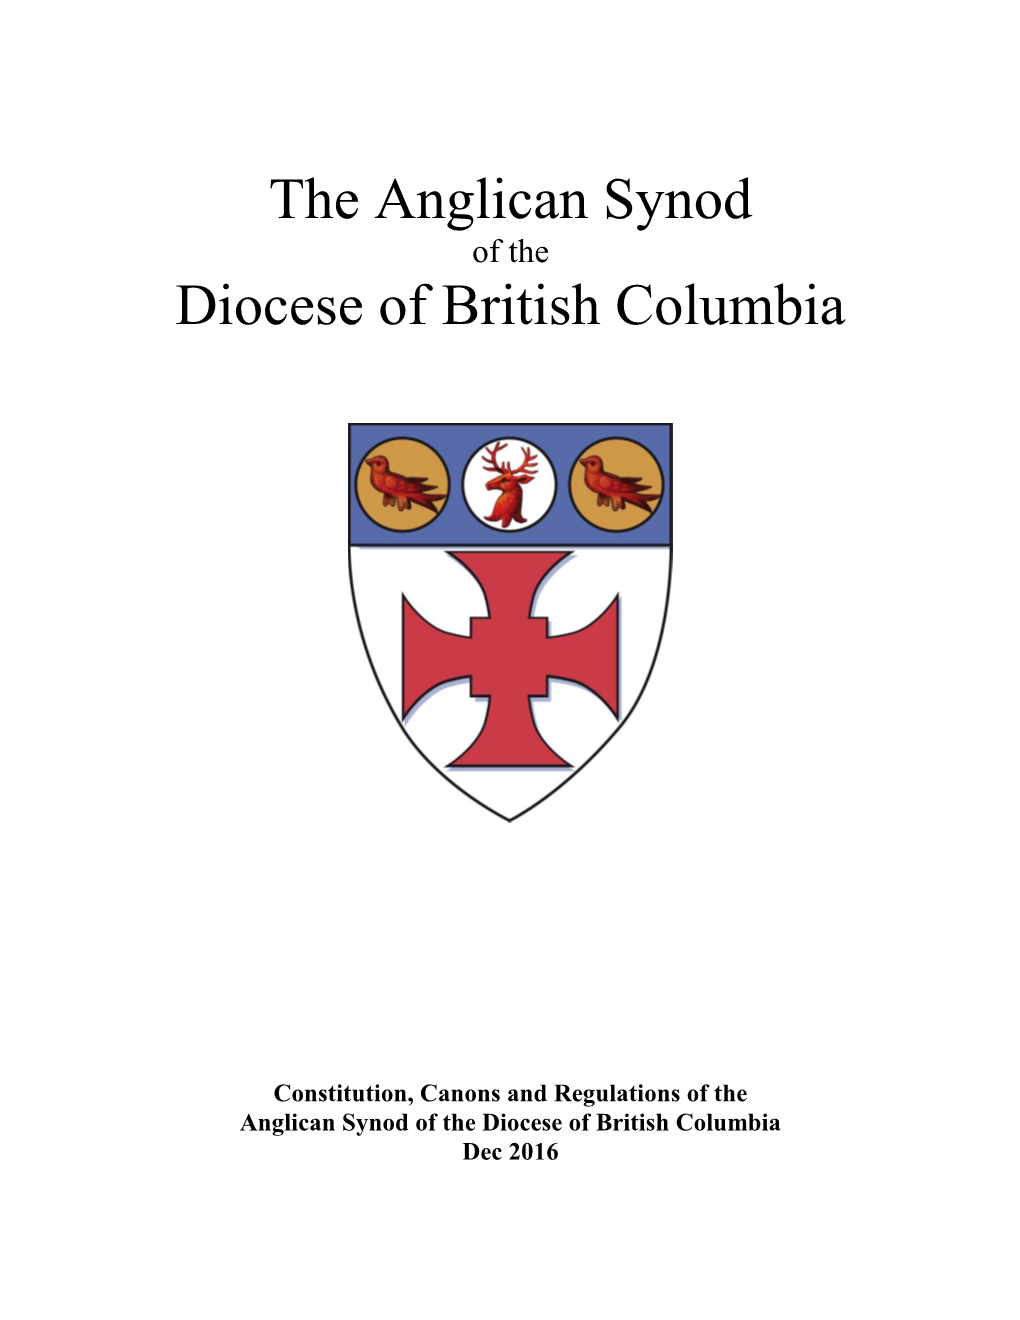 The Anglican Synod Diocese of British Columbia